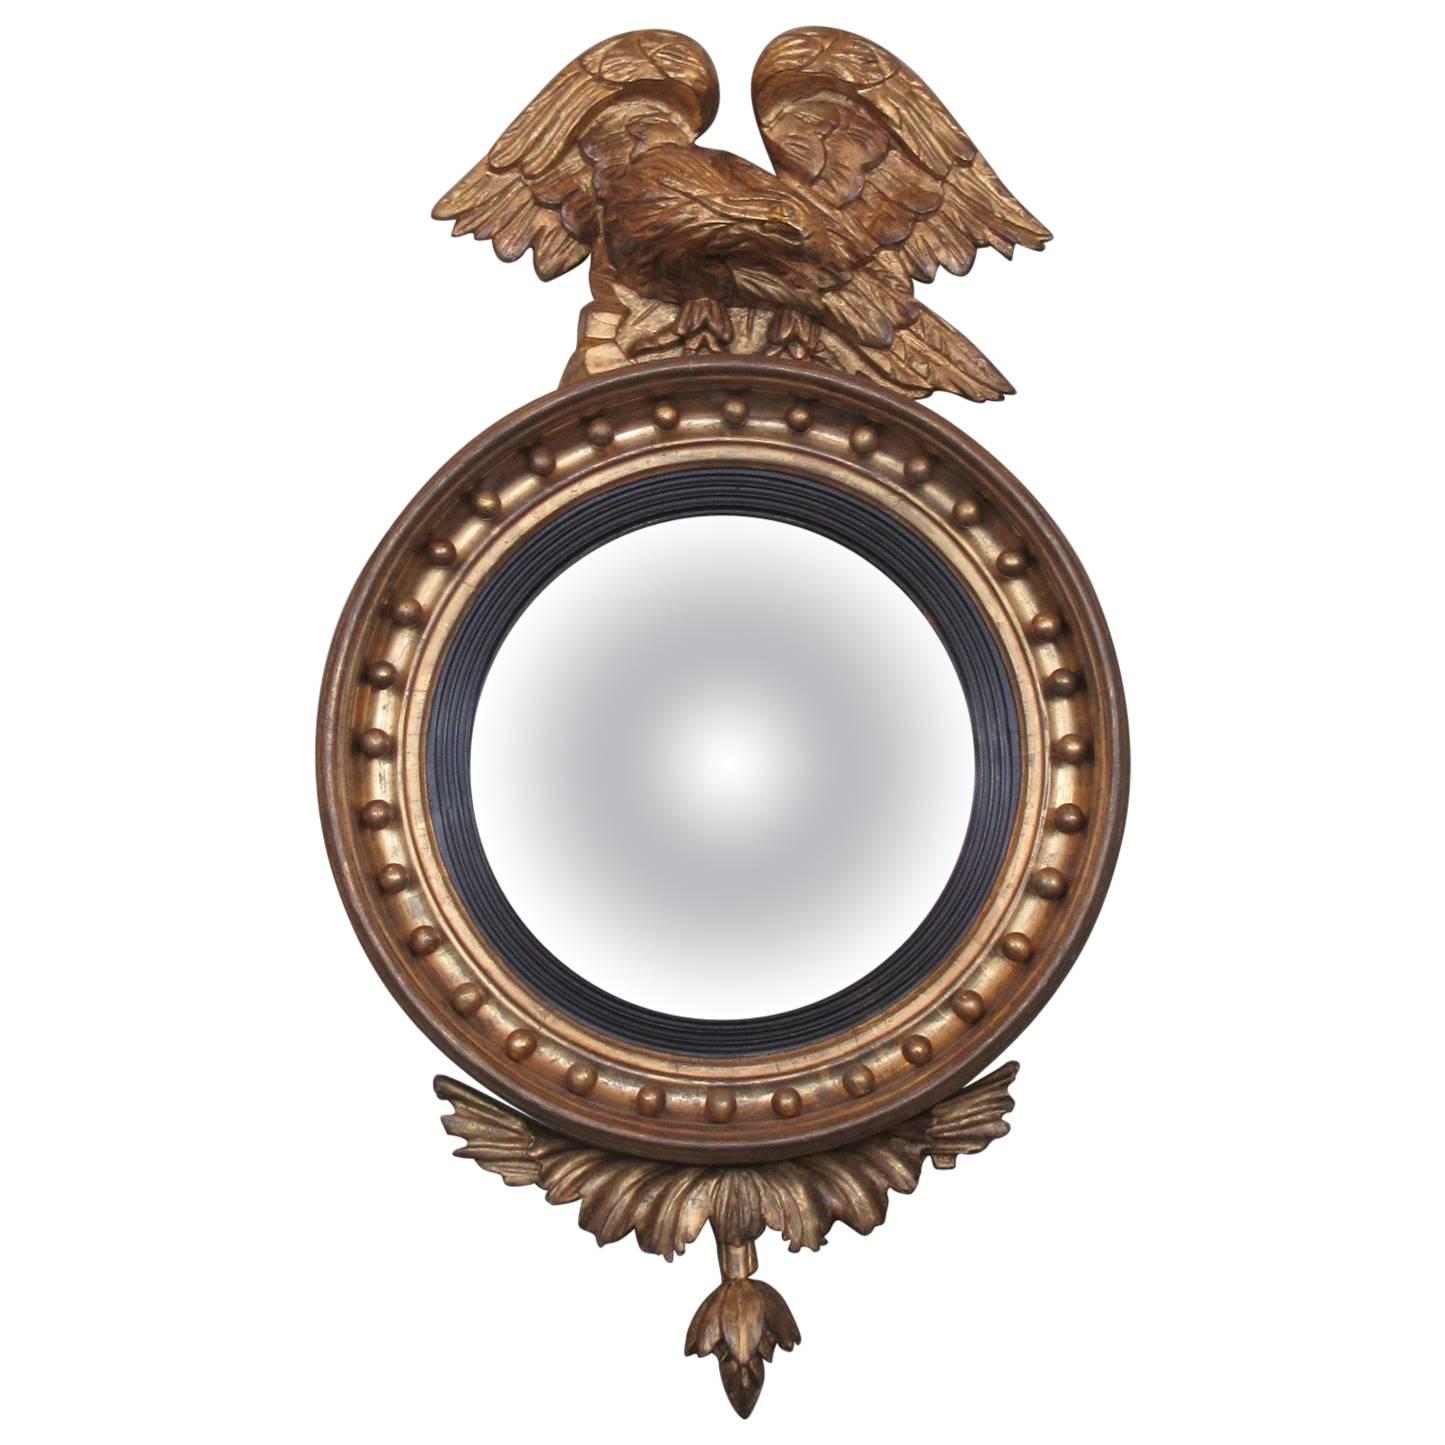 Early 19th Century English Regency Giltwood Convex Mirror with Displayed Eagle